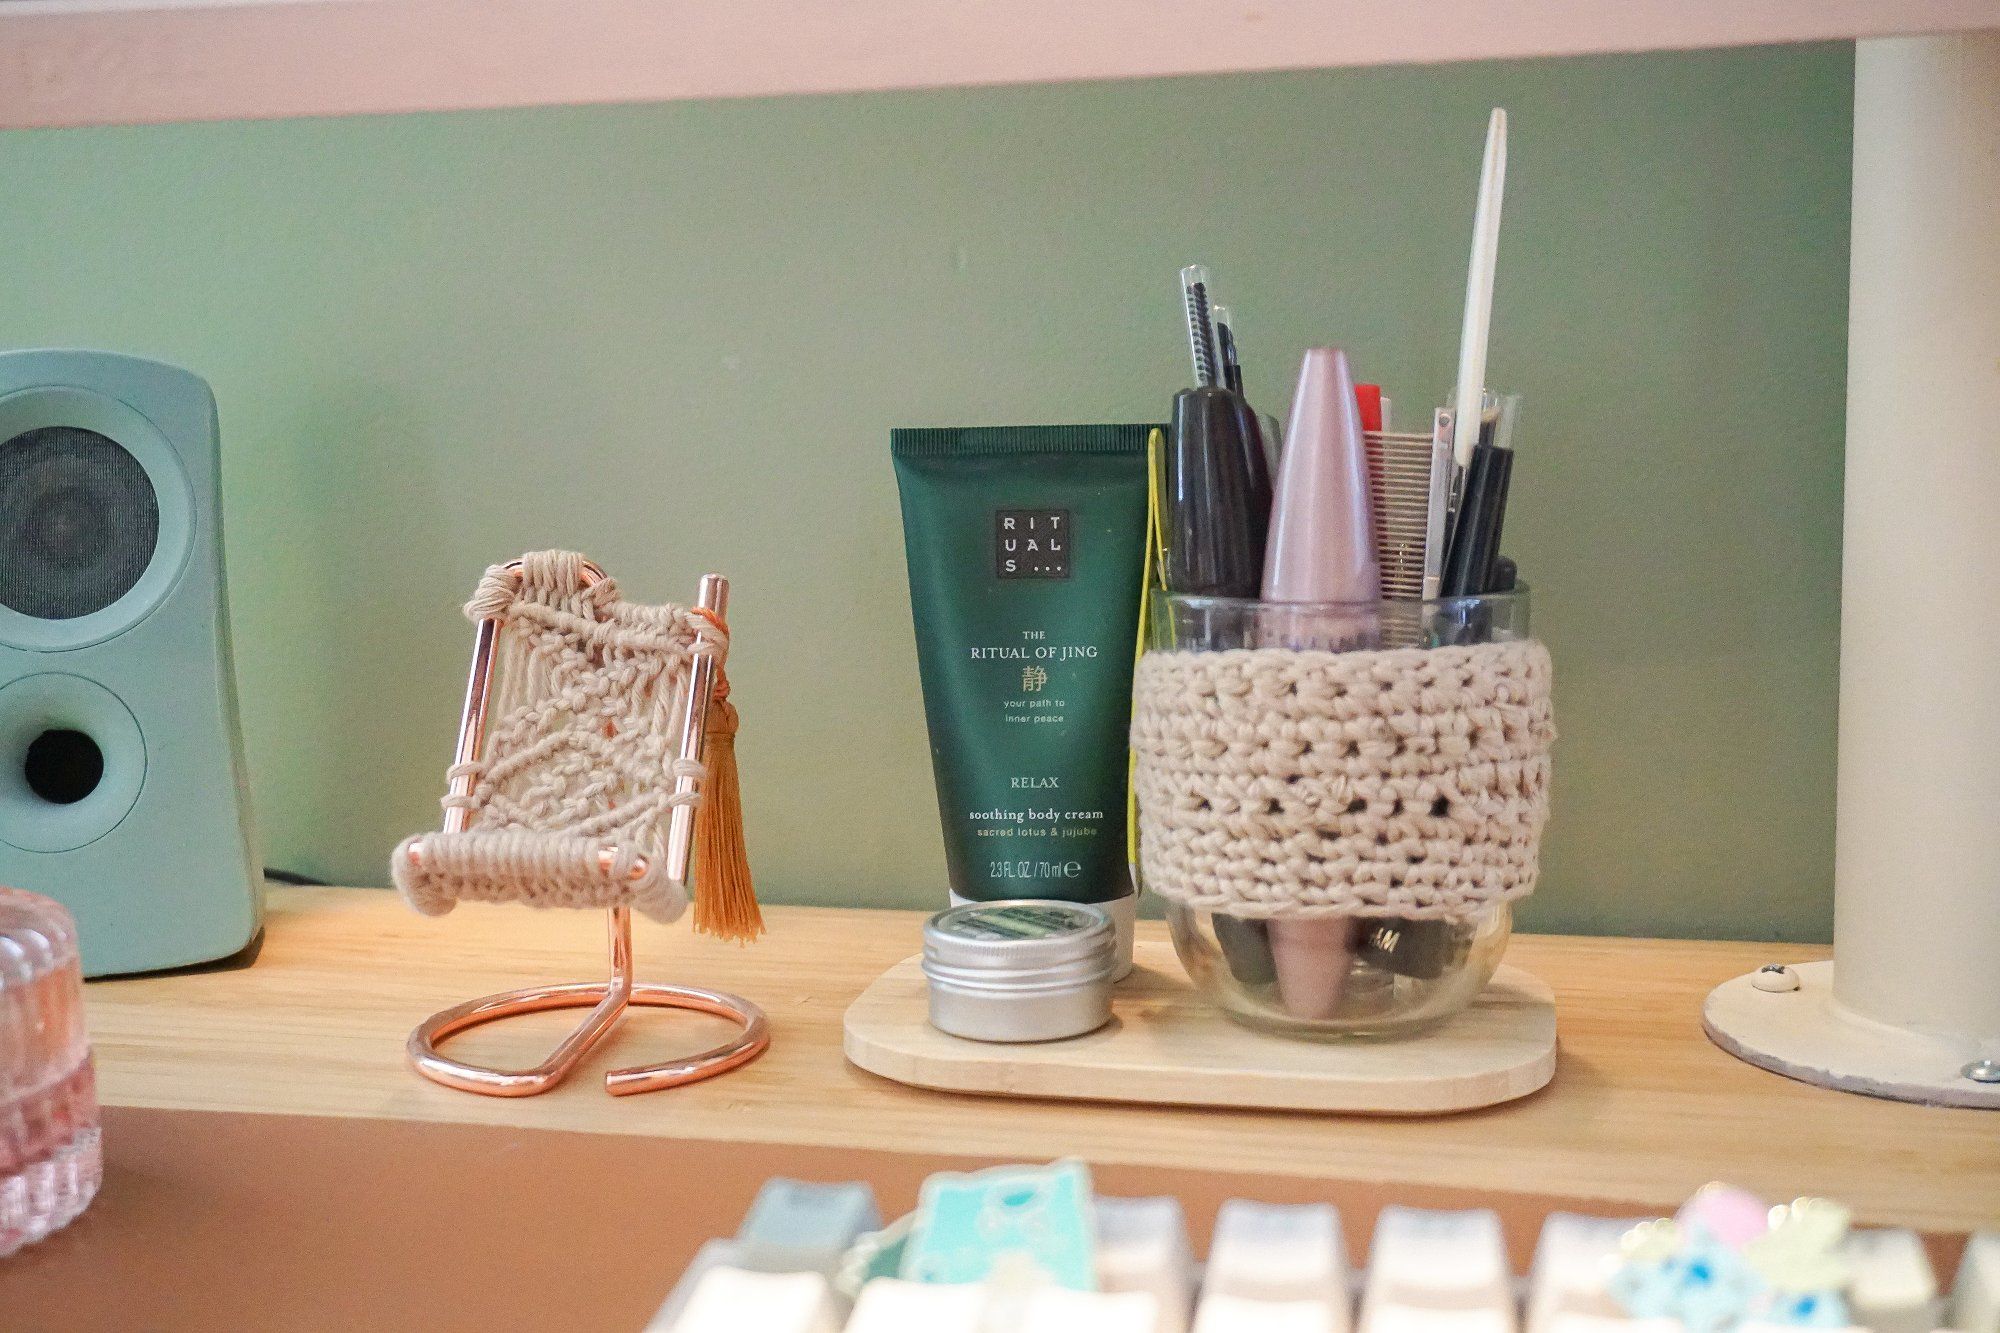 A phone stand with a handmade macramé cradle, a makeup glass with a crocheted band, a tube of Rituals soothing body cream, a lip balm, and a teal hand-painted Logitech speaker on the desk in a home office